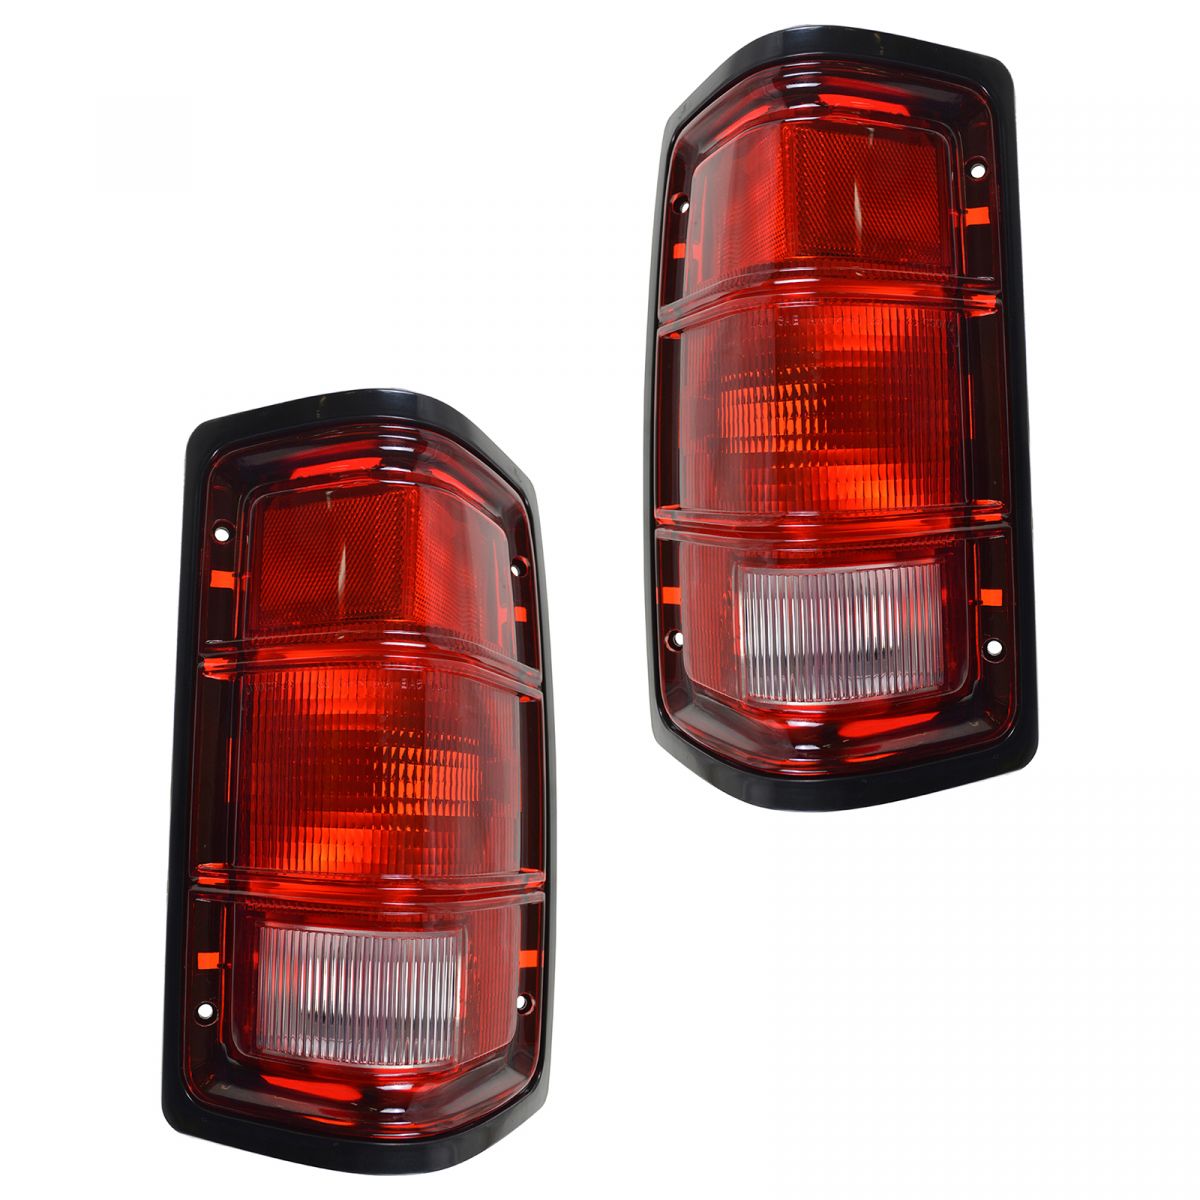 Driver and Passenger Taillights Tail Lamps with Black Bezels Replacement for Dodge Pickup Truck SUV 55076439 55076438 Aftermarket